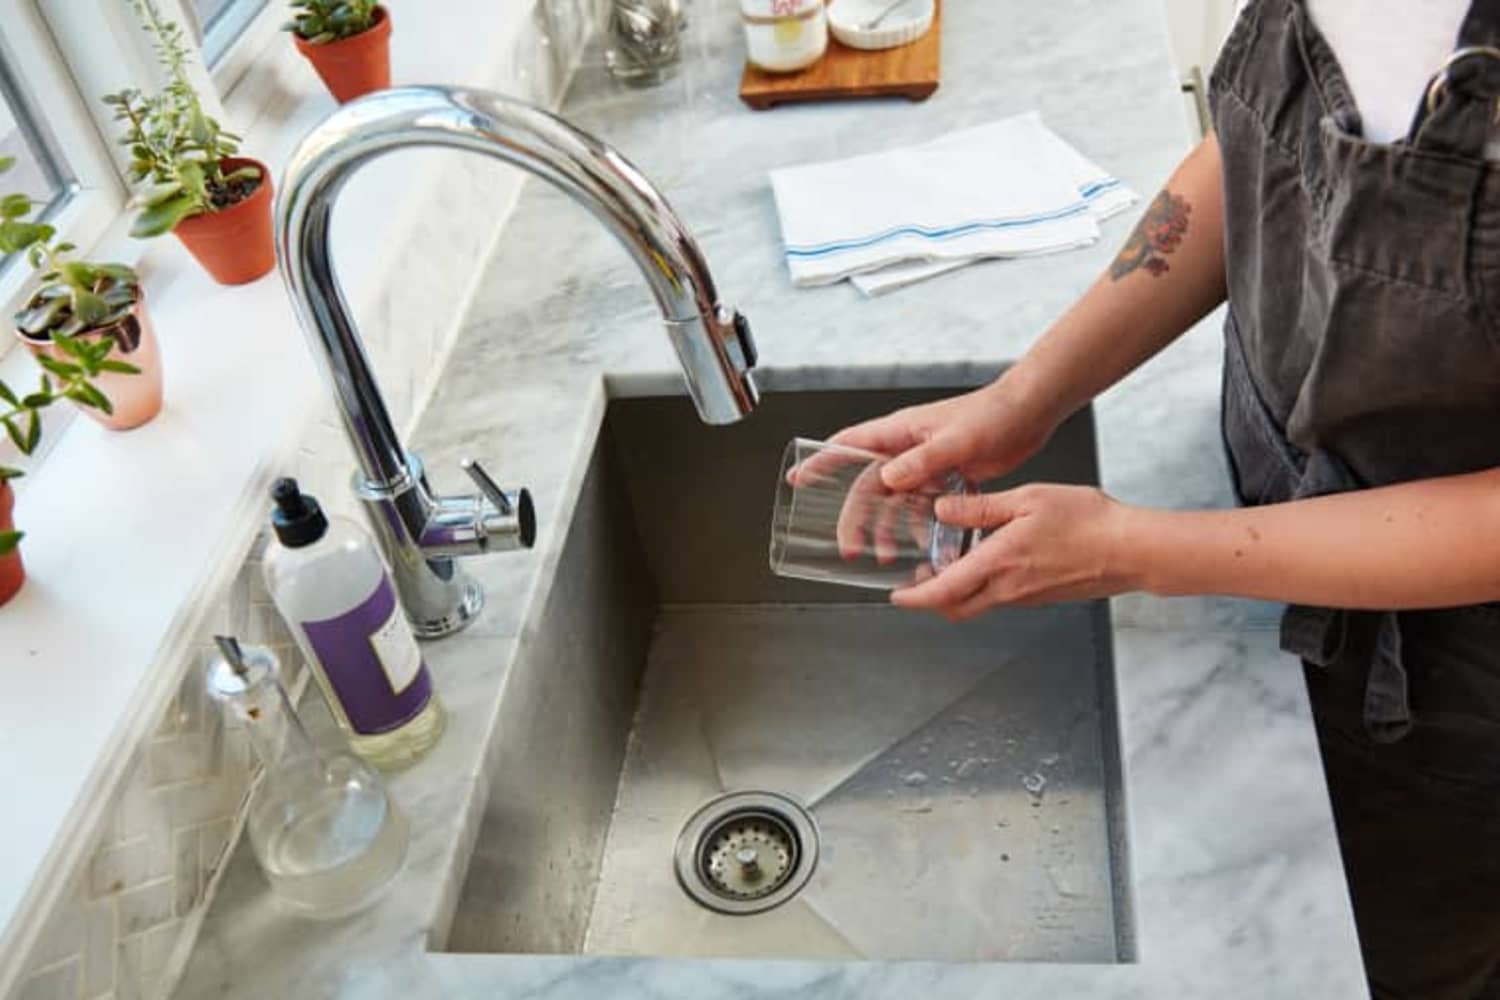 How to clean a stainless steel sink properly without damaging it